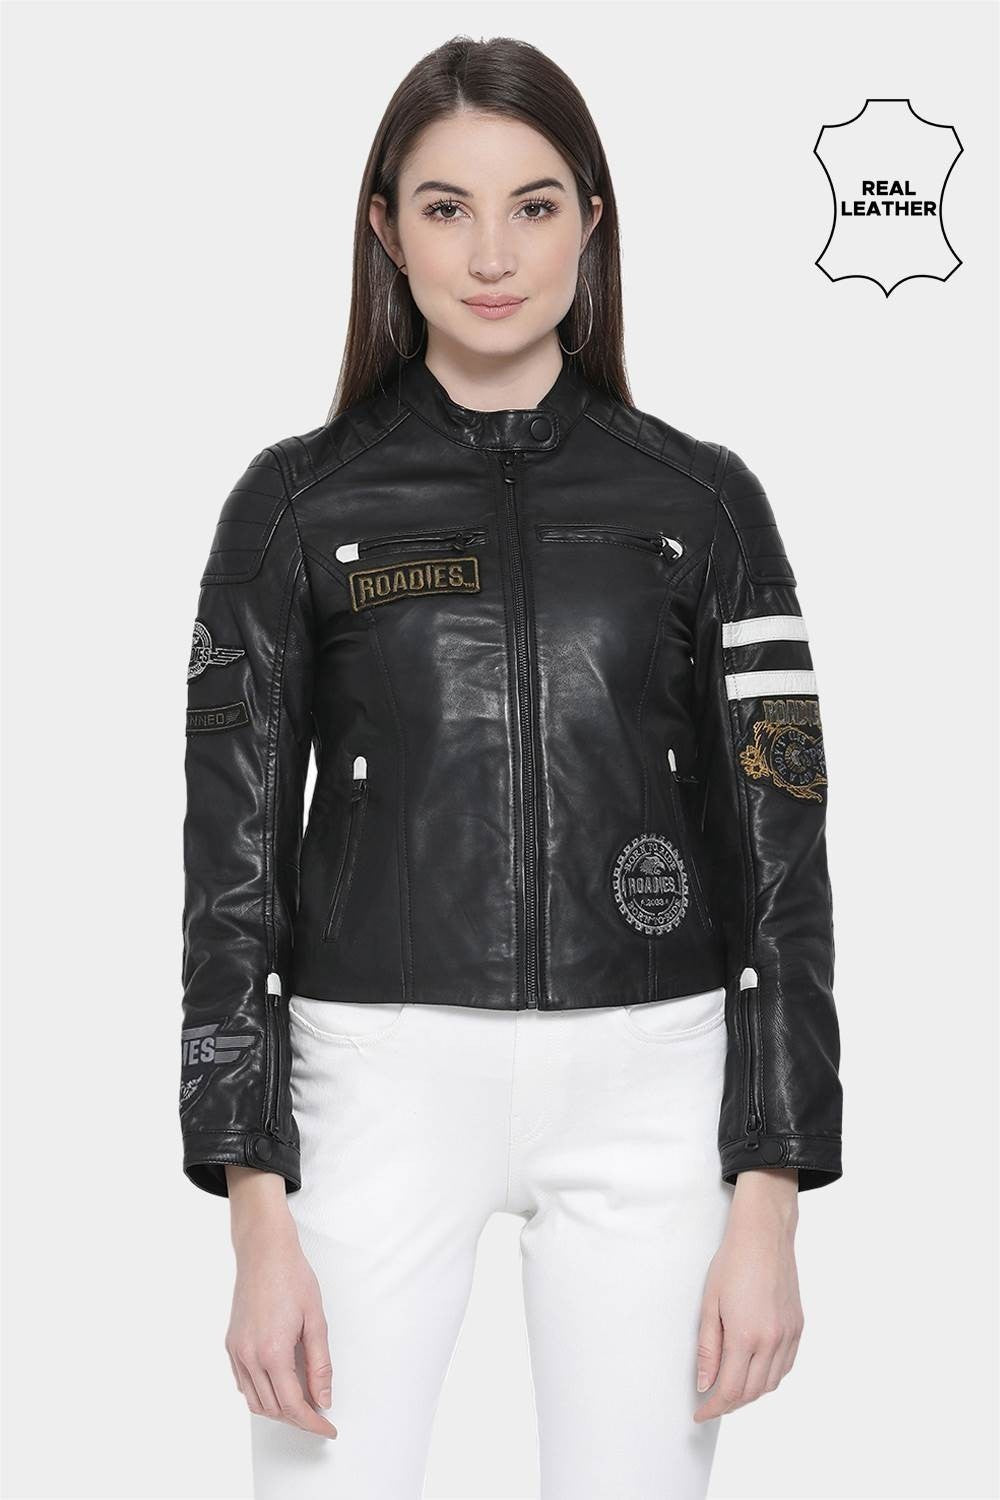 Justanned Sporty Sleeve Womens Leather Jacket